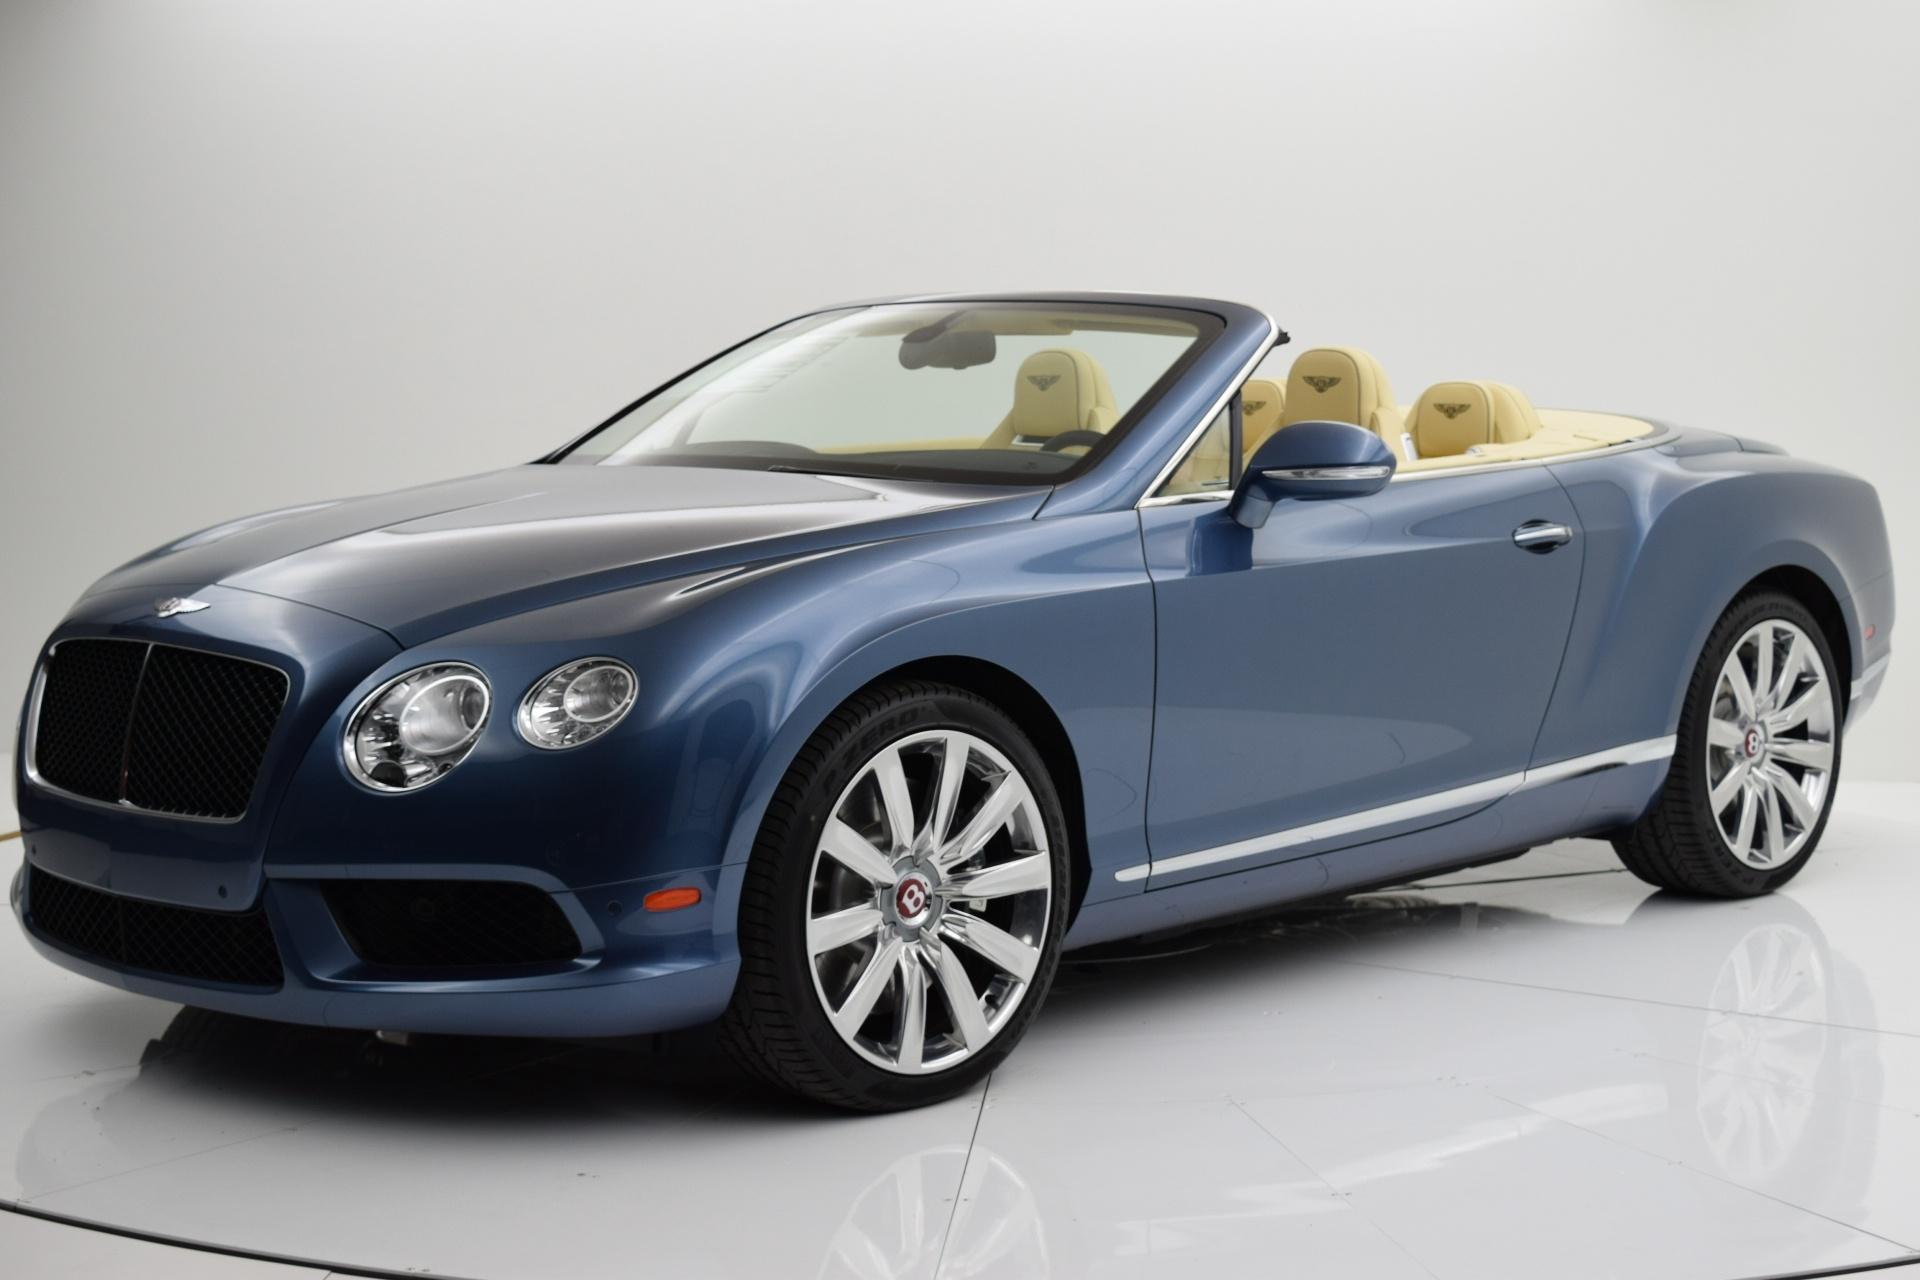 Used 2015 Bentley Continental GT V8 for sale Sold at Bentley Palmyra N.J. in Palmyra NJ 08065 2